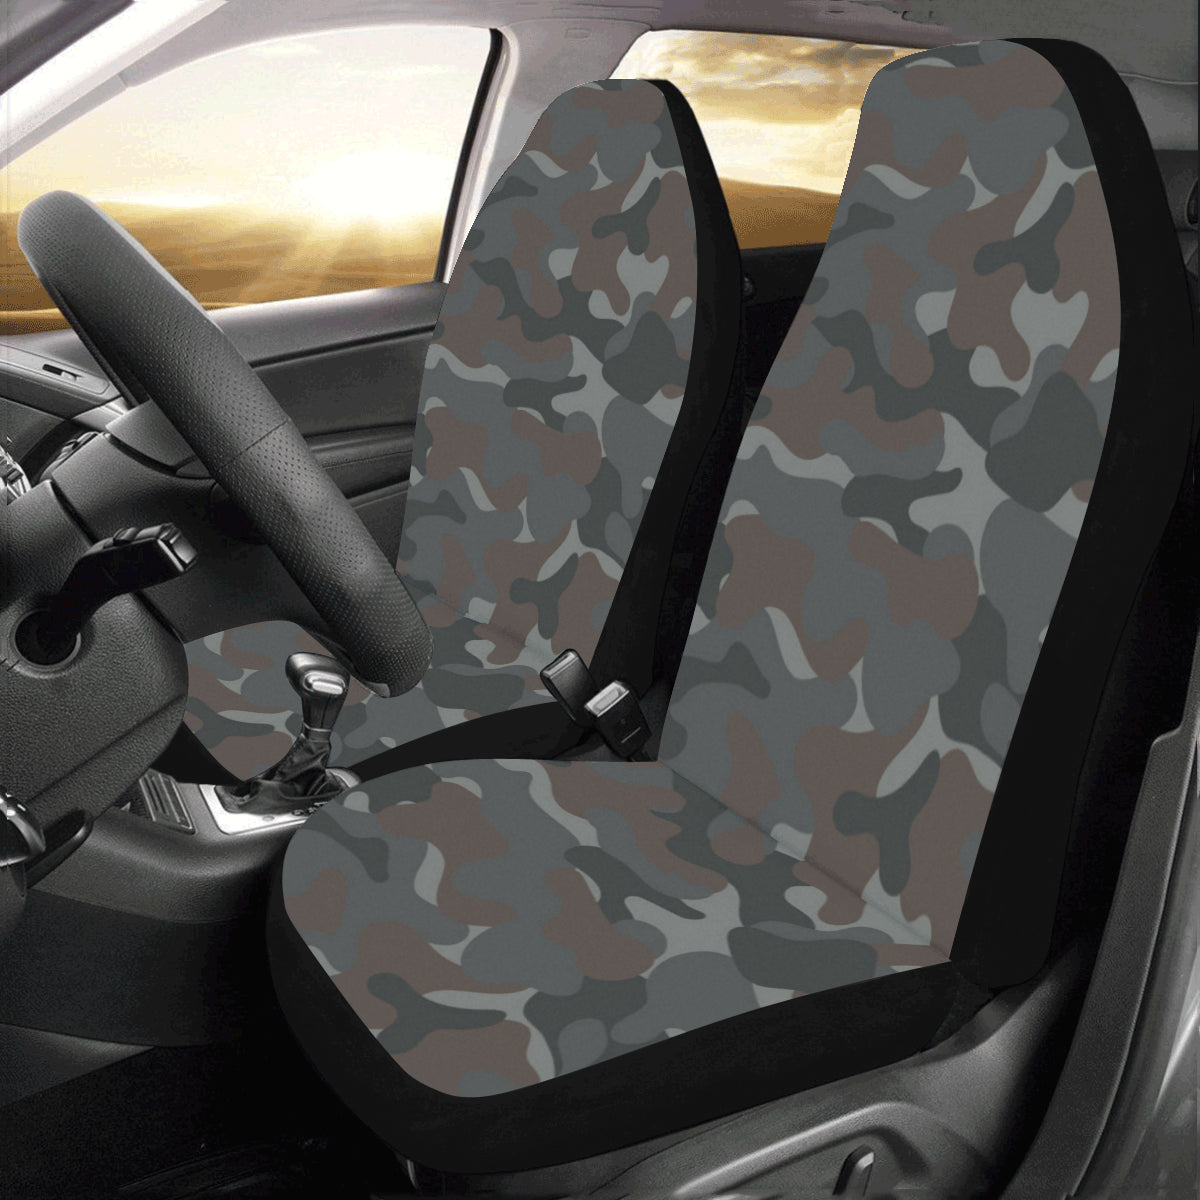 Camo Car Seat Cover, Dark Grey Camouflage Front Seat Covers (Set of 2), Dog Seat Protectors Accessory Starcove Fashion